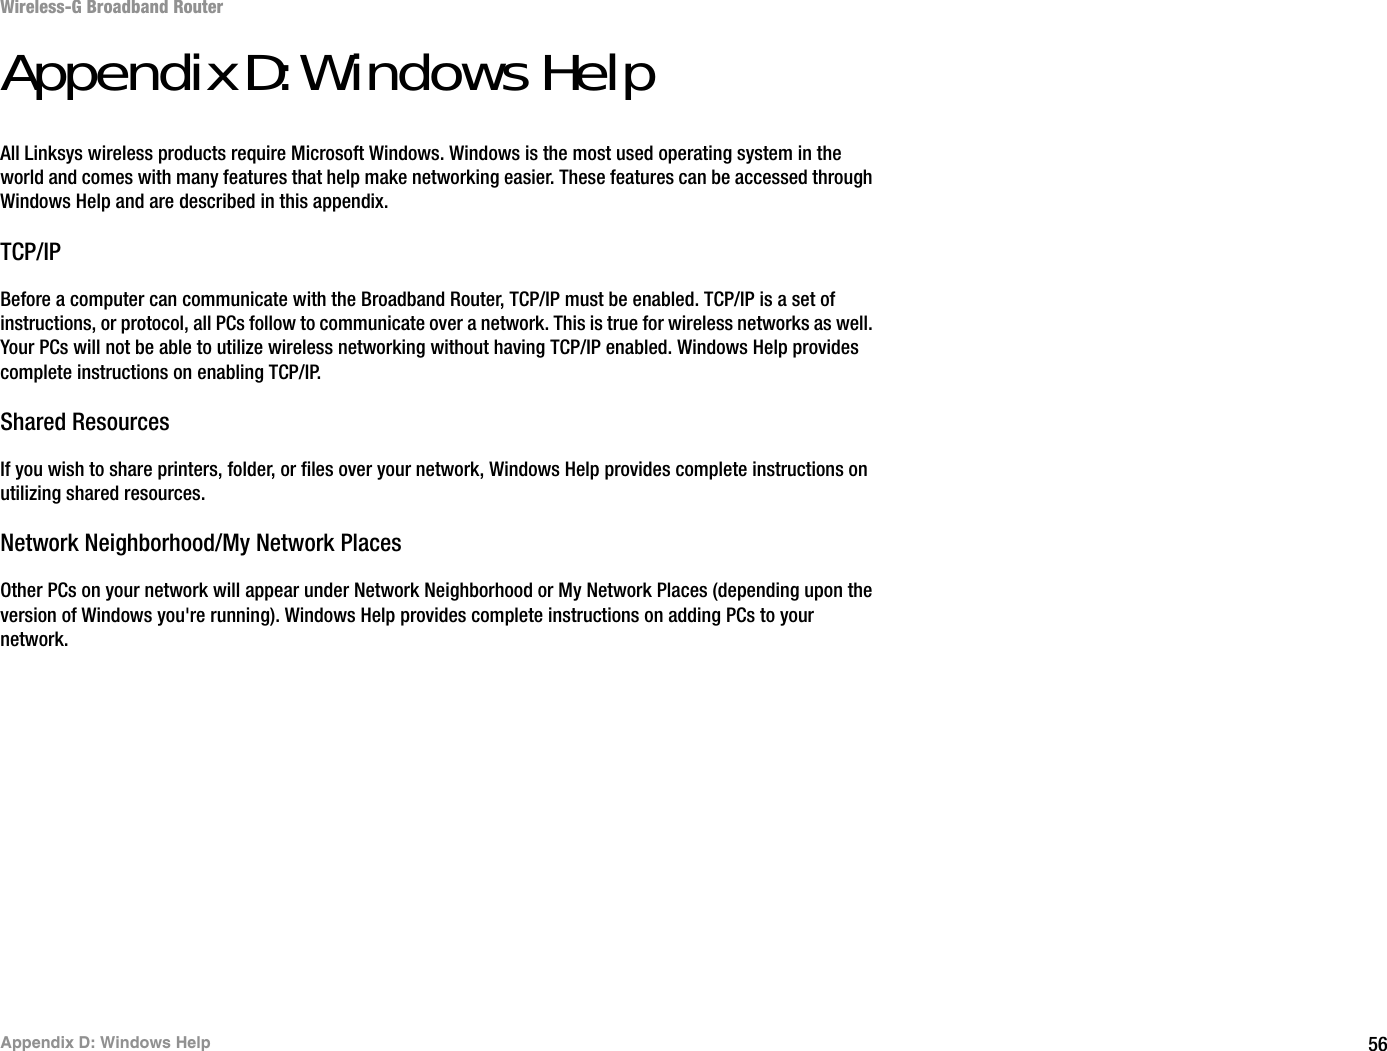 56Appendix D: Windows HelpWireless-G Broadband RouterAppendix D: Windows HelpAll Linksys wireless products require Microsoft Windows. Windows is the most used operating system in the world and comes with many features that help make networking easier. These features can be accessed through Windows Help and are described in this appendix.TCP/IPBefore a computer can communicate with the Broadband Router, TCP/IP must be enabled. TCP/IP is a set of instructions, or protocol, all PCs follow to communicate over a network. This is true for wireless networks as well. Your PCs will not be able to utilize wireless networking without having TCP/IP enabled. Windows Help provides complete instructions on enabling TCP/IP.Shared ResourcesIf you wish to share printers, folder, or files over your network, Windows Help provides complete instructions on utilizing shared resources.Network Neighborhood/My Network PlacesOther PCs on your network will appear under Network Neighborhood or My Network Places (depending upon the version of Windows you&apos;re running). Windows Help provides complete instructions on adding PCs to your network.